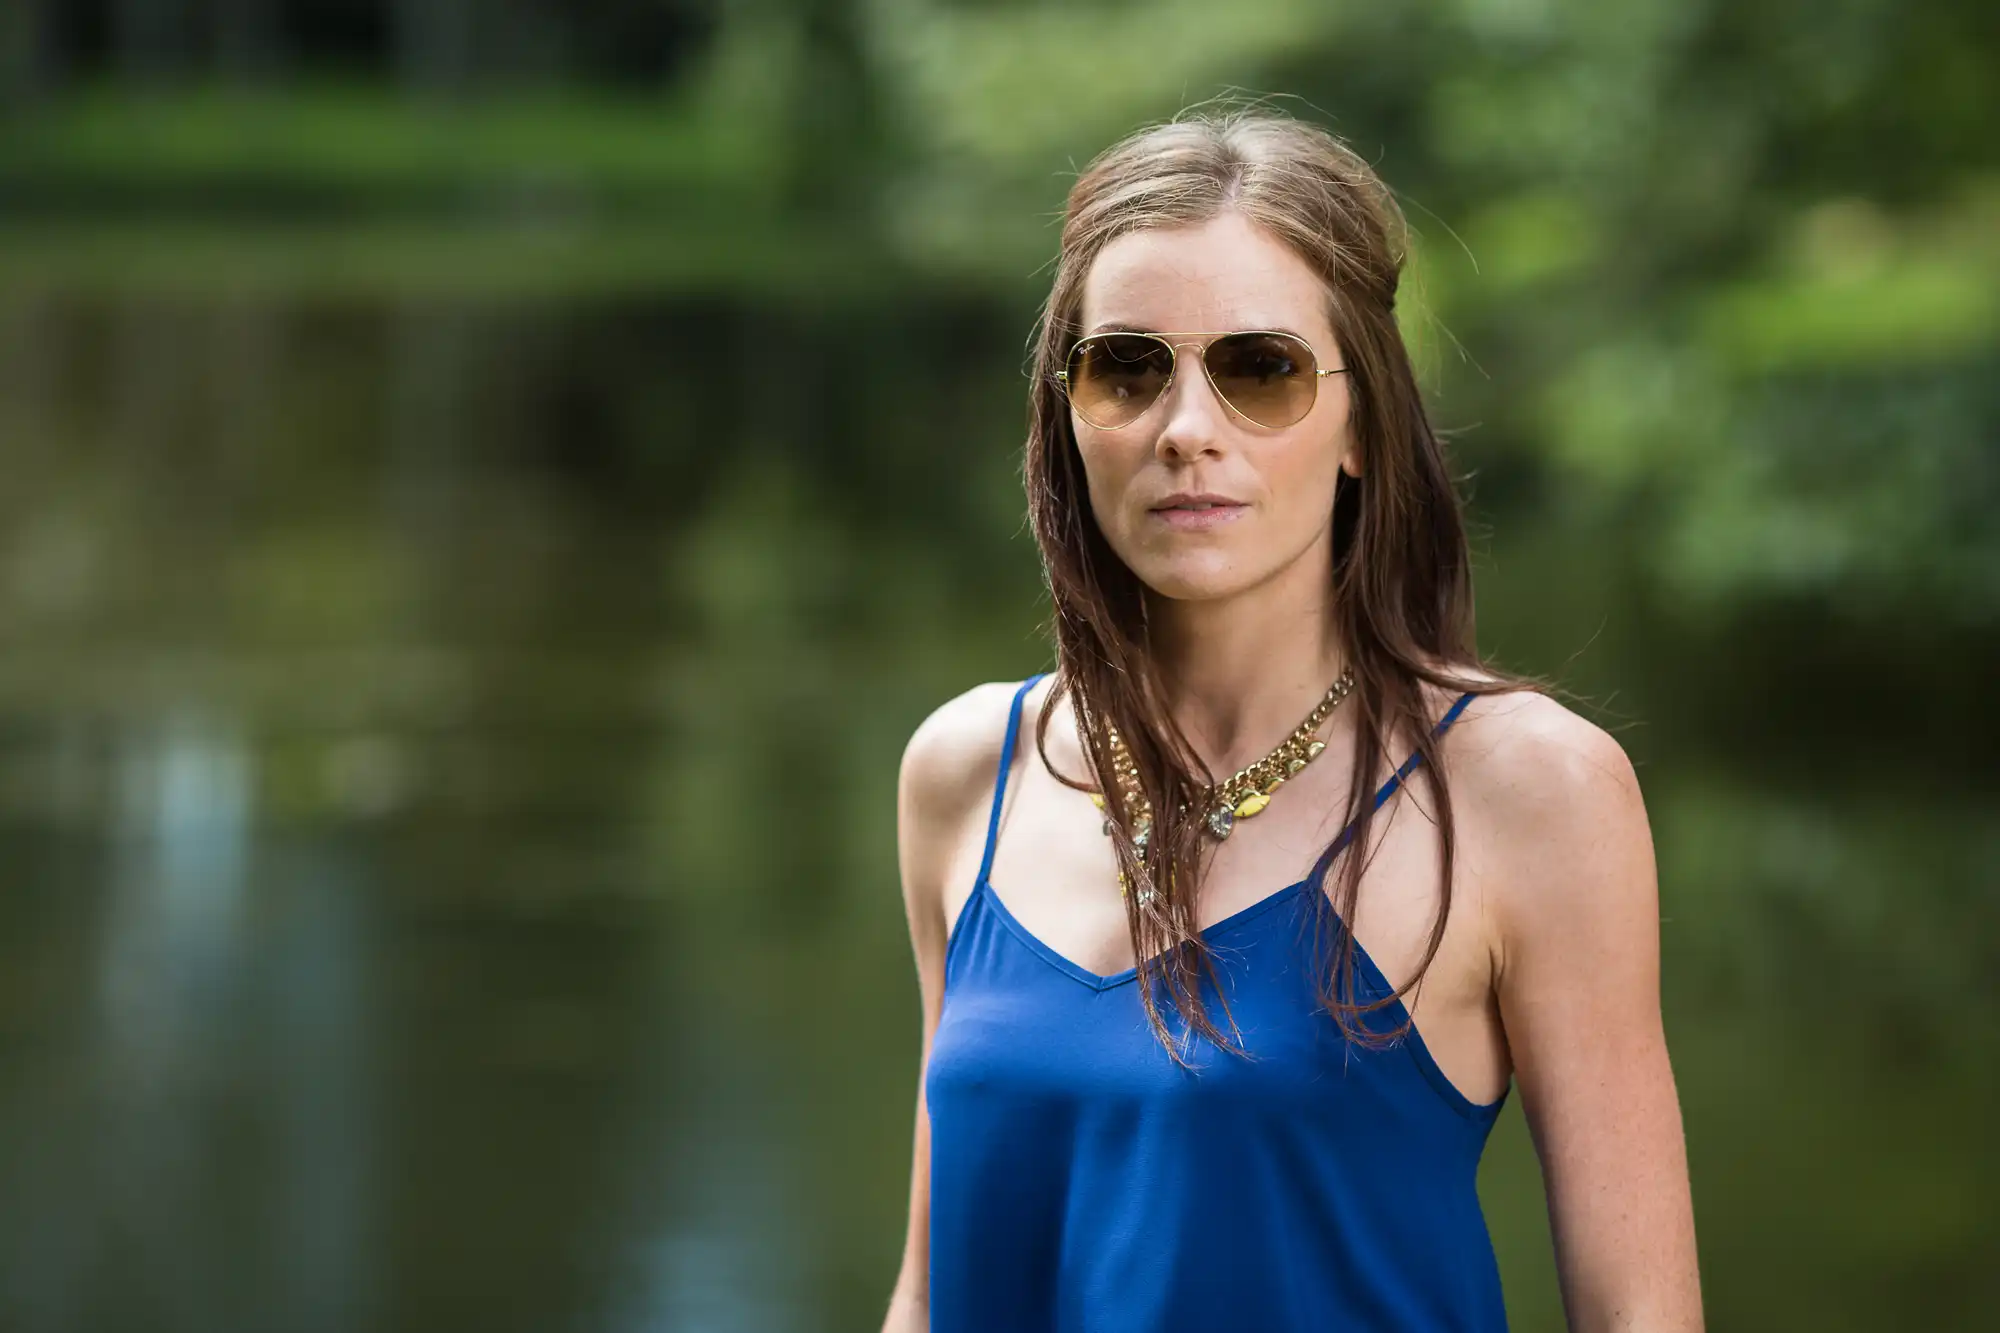 A woman wearing sunglasses and a blue top stands in front of a pond in a park.